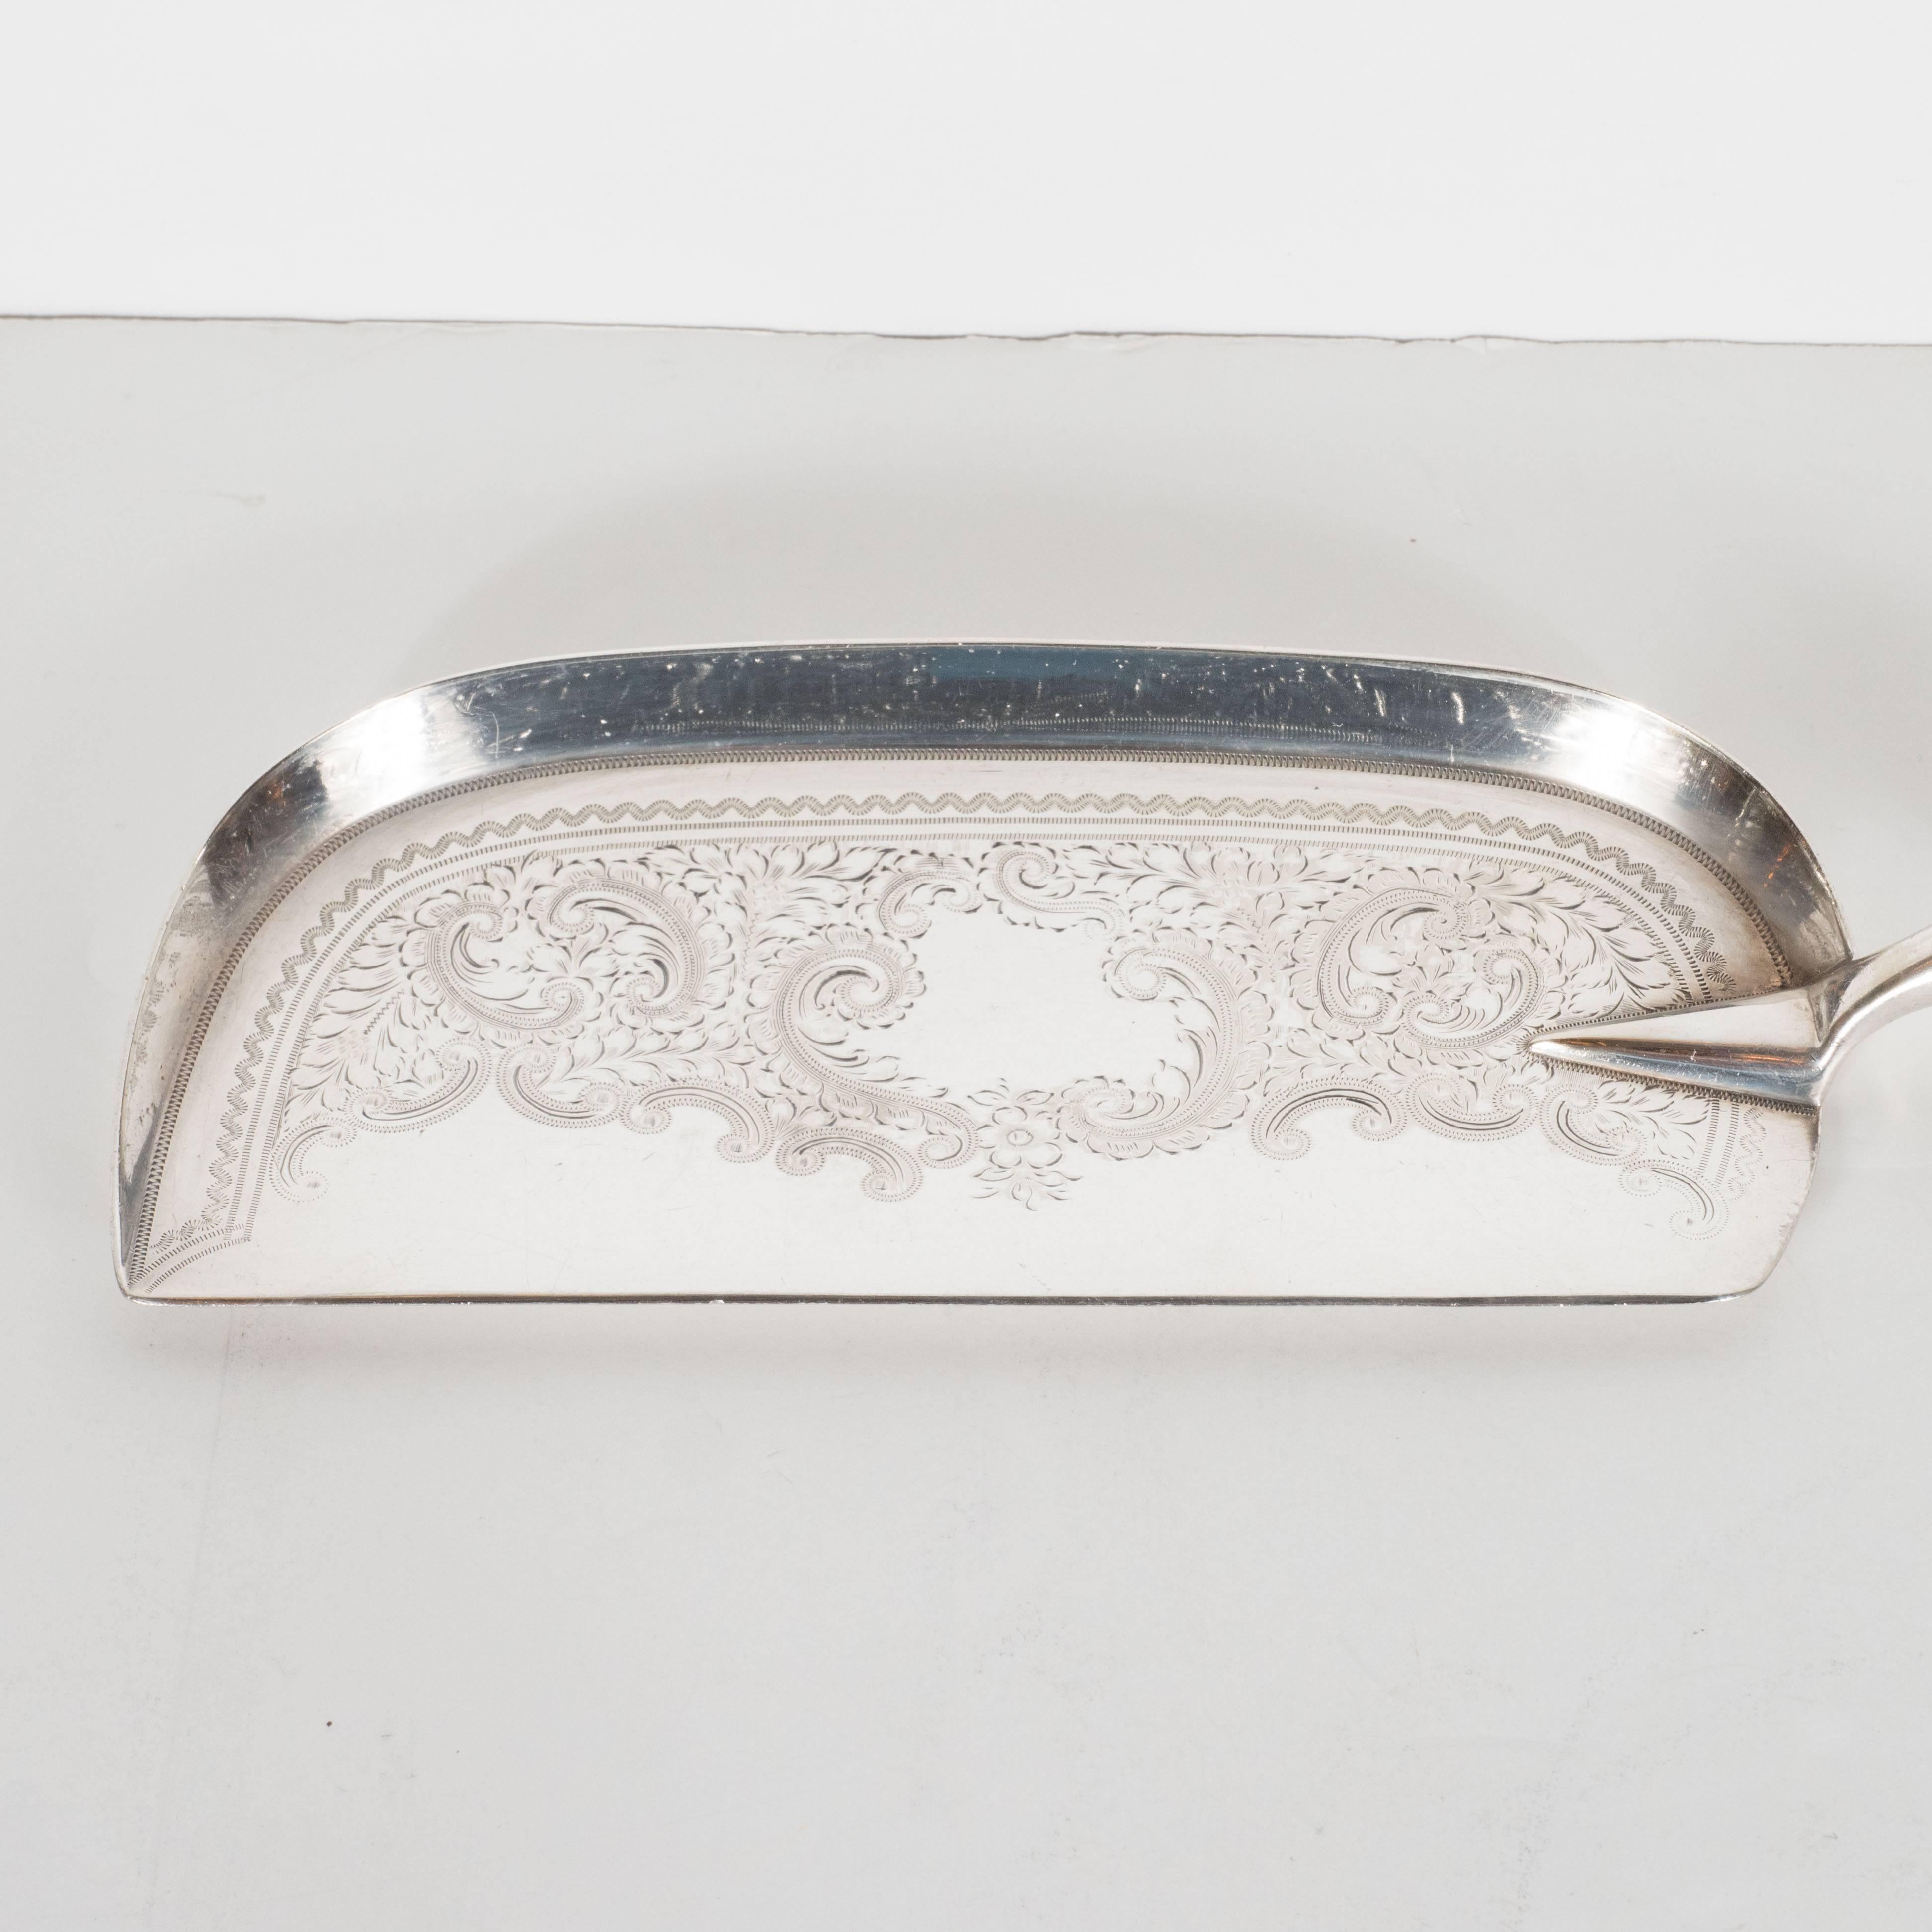 Late 19th Century Victorian Silver Plate Cake Cutter with Bone Handle and Ornate Engravings